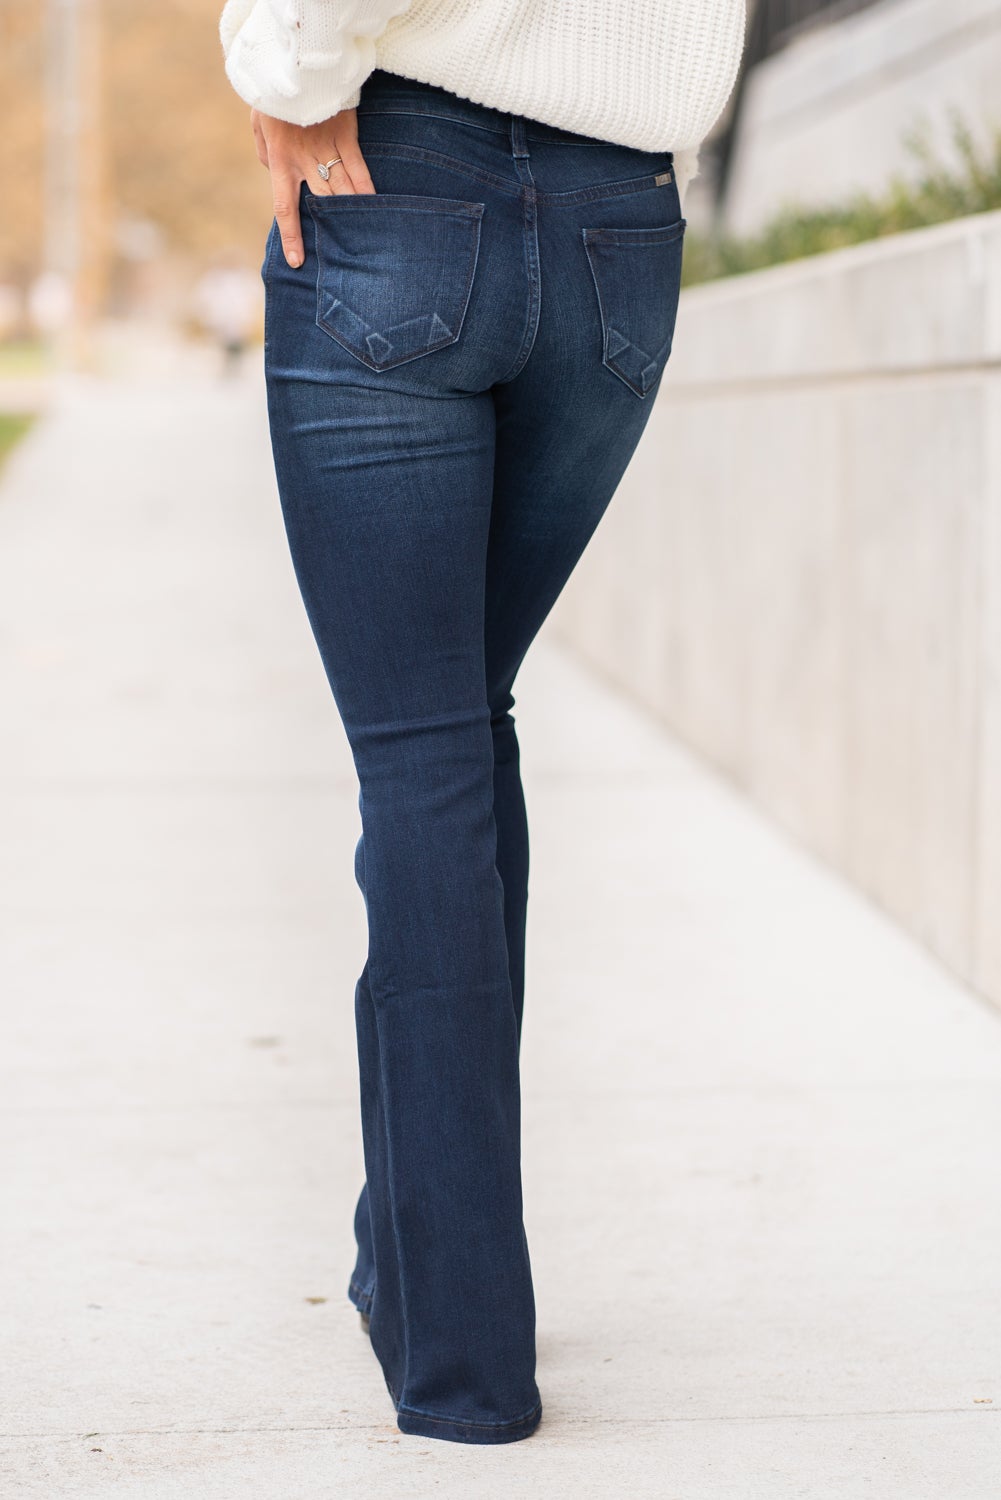 KanCan Jeans Collection: Core Style  Color: Dark Wash Cut: Flare, 33.75" Inseam  Rise: Mid-Rise, 9" Front Rise 54% 54% COTTON 34% Rayon 10% POLYESTER 2% SPANDEX Fly: Zipper Style #: KC6102D Contact us for any additional measurements or sizing.  Taylor is 5'7" and wears a size 4 in jeans, small top and an 8.5 in shoes. She is wearing a size size 25/3 in these jeans.